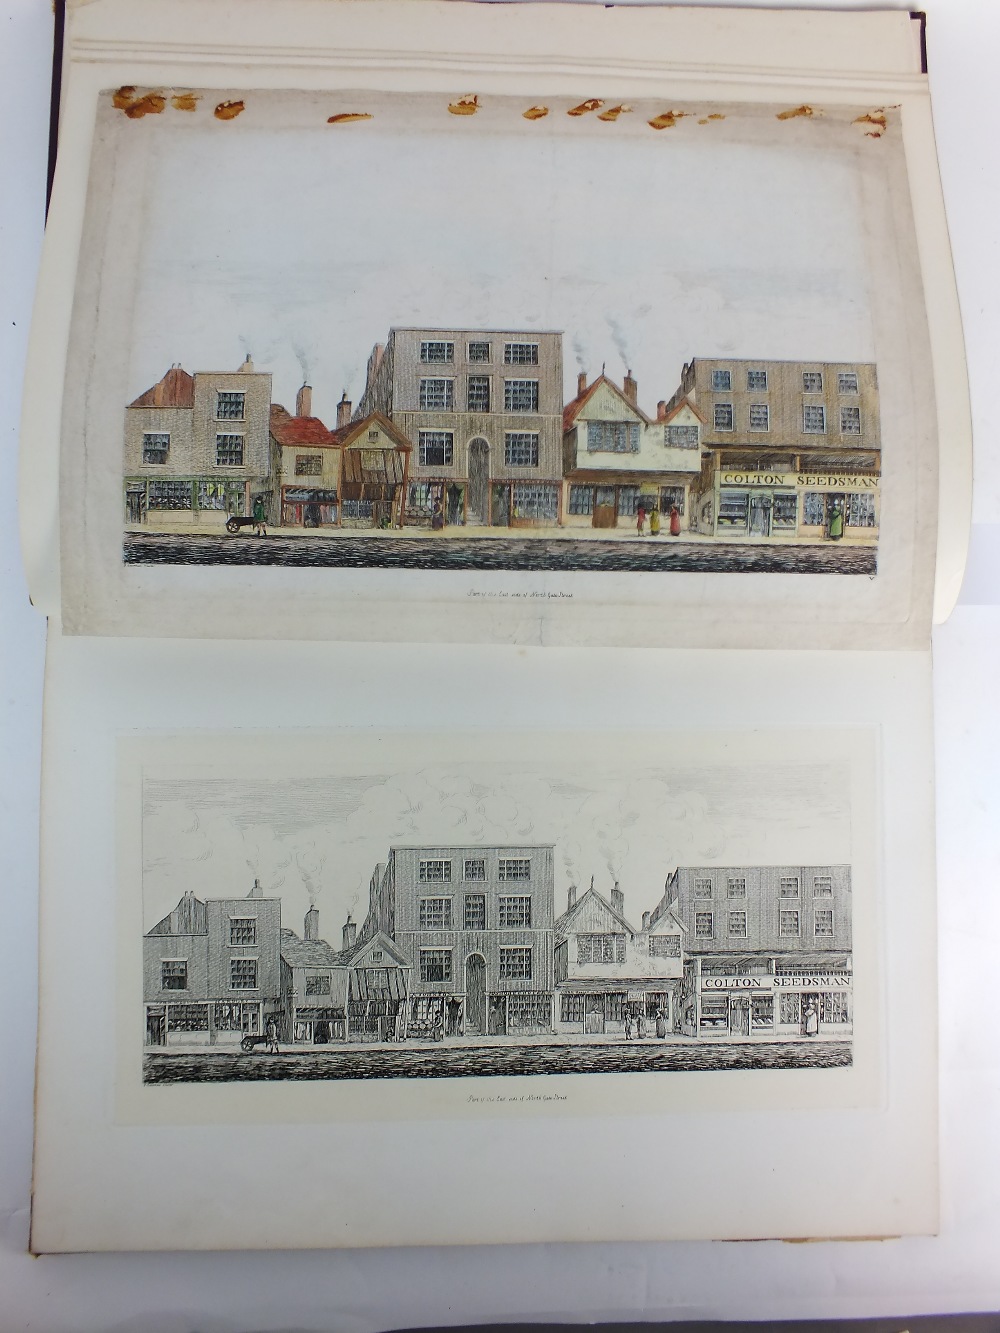 HUGHES, Thomas, Ancient Chester: A Series of Illustrations of the Streets of this Old City, - Image 2 of 2